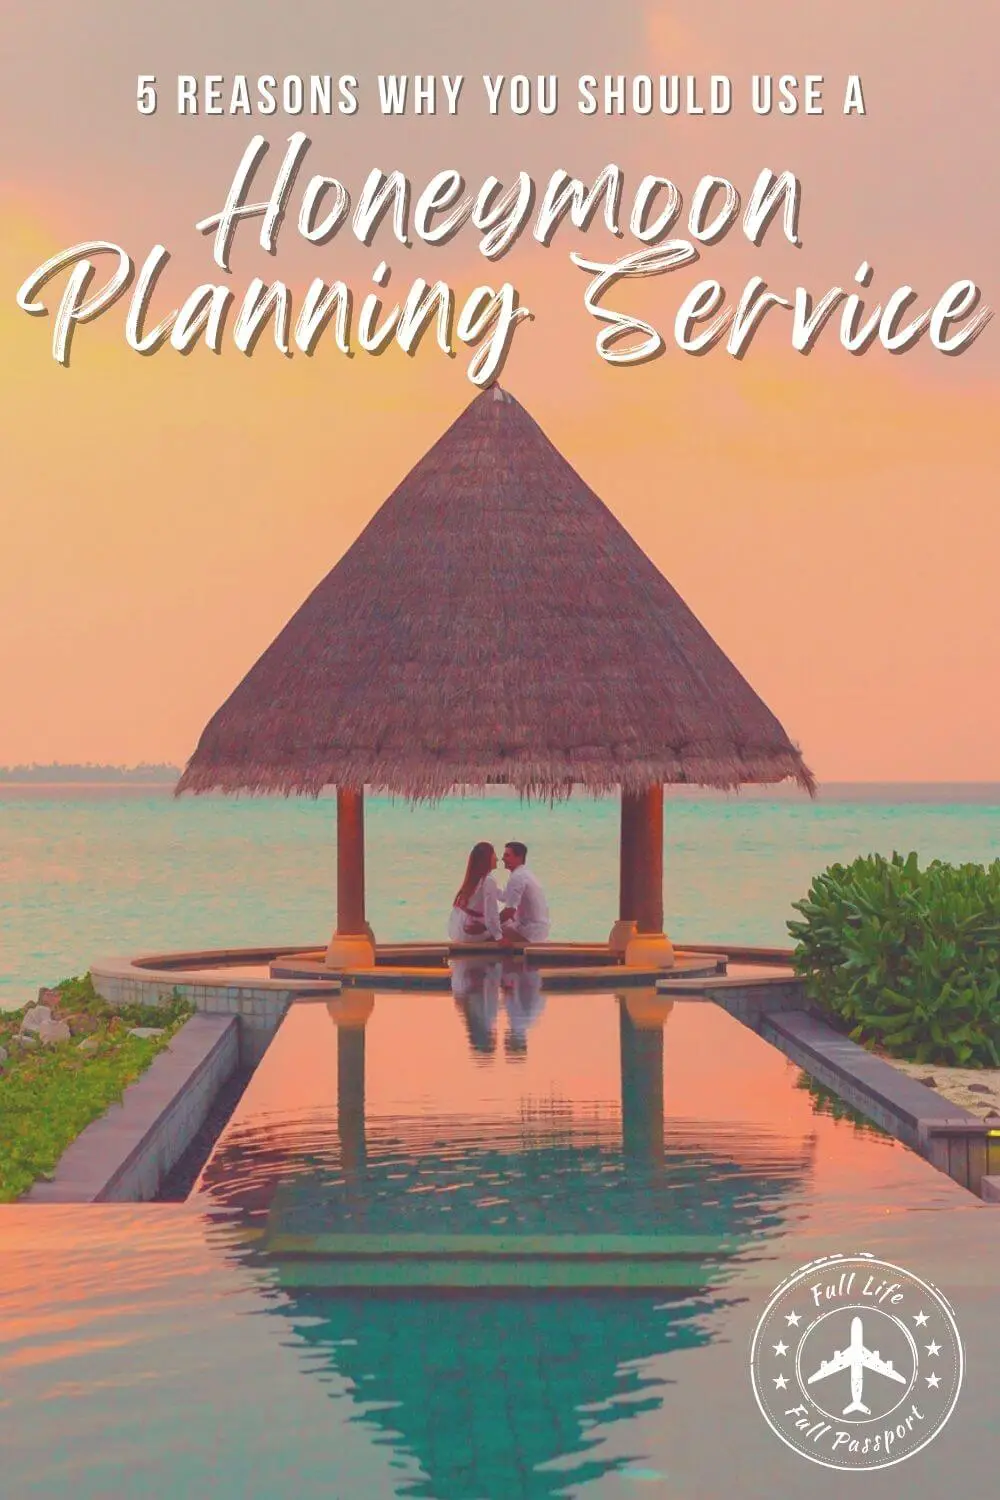 5 Reasons Why You Should Use a Honeymoon Planning Service